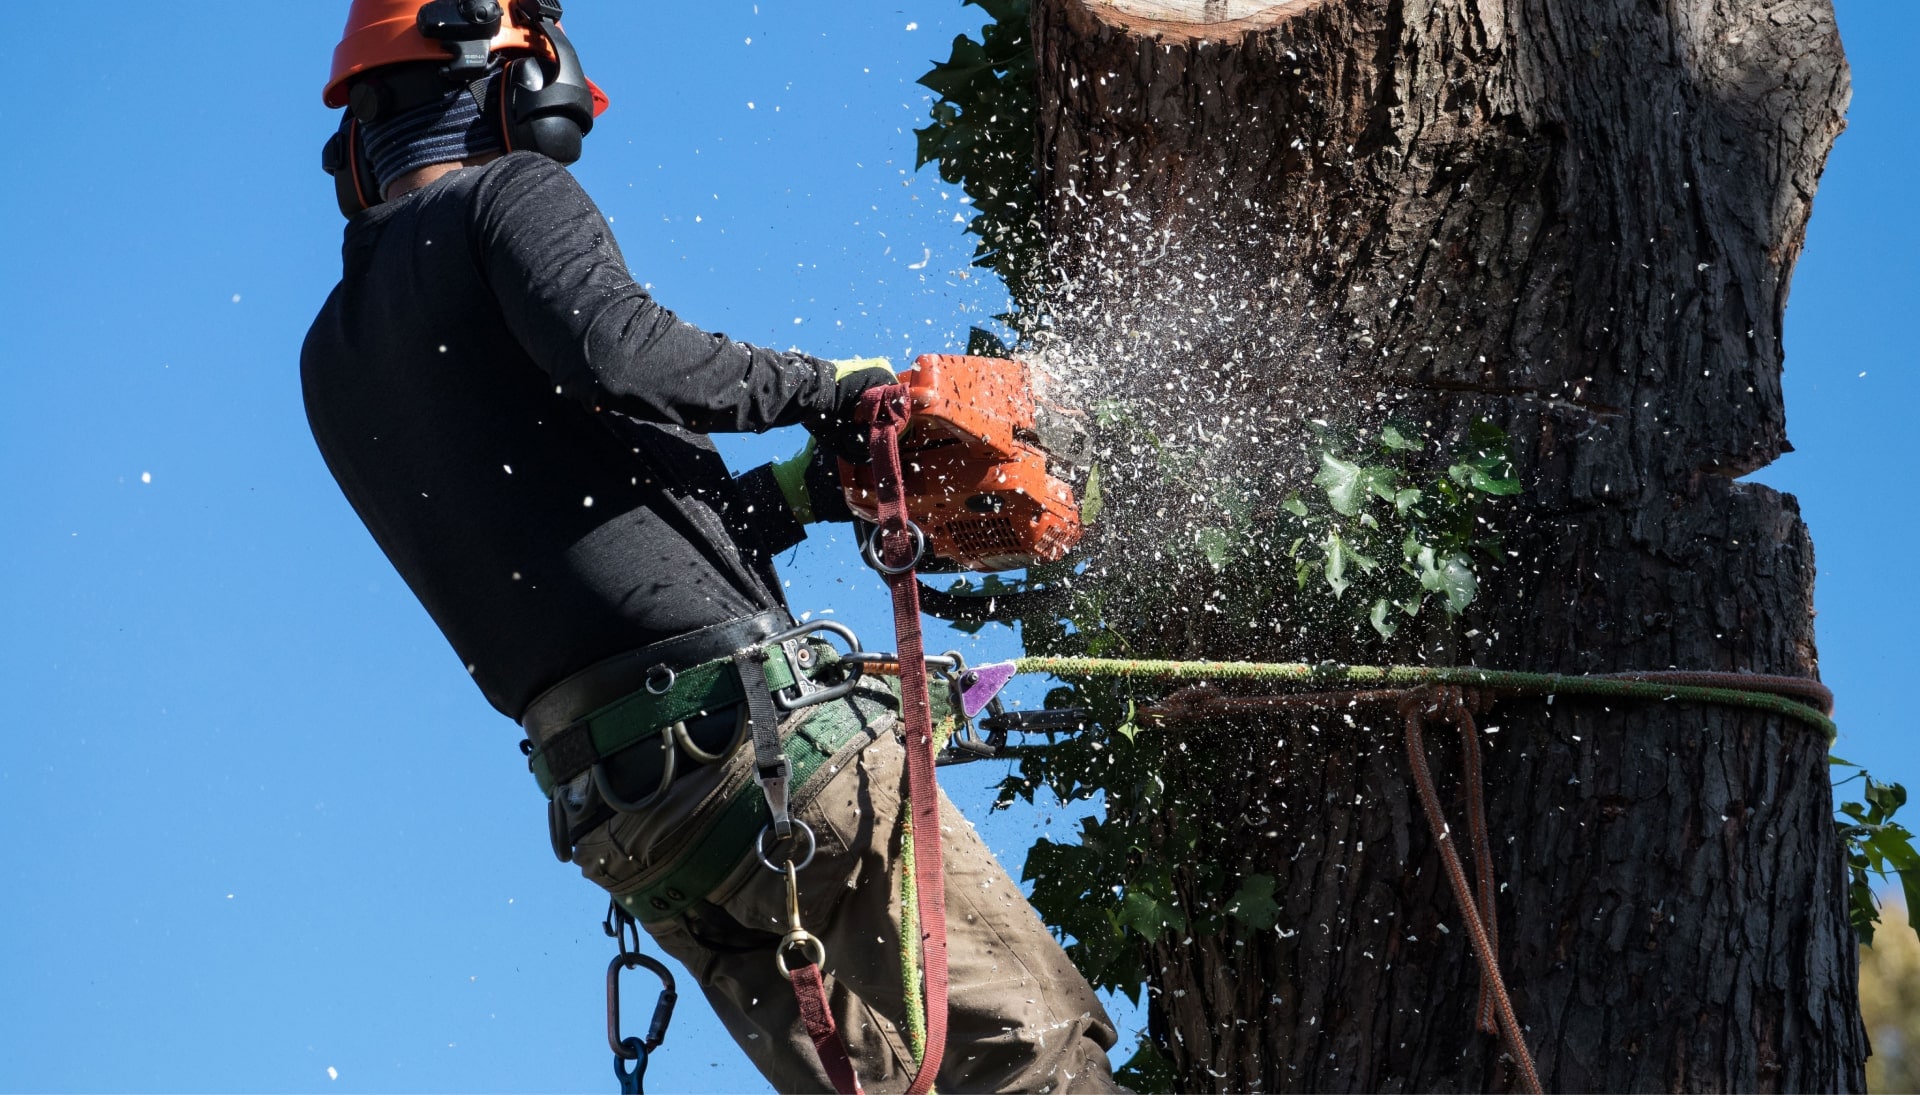 A tree removal expert is high in tree to cut down stump in Gainesville, FL